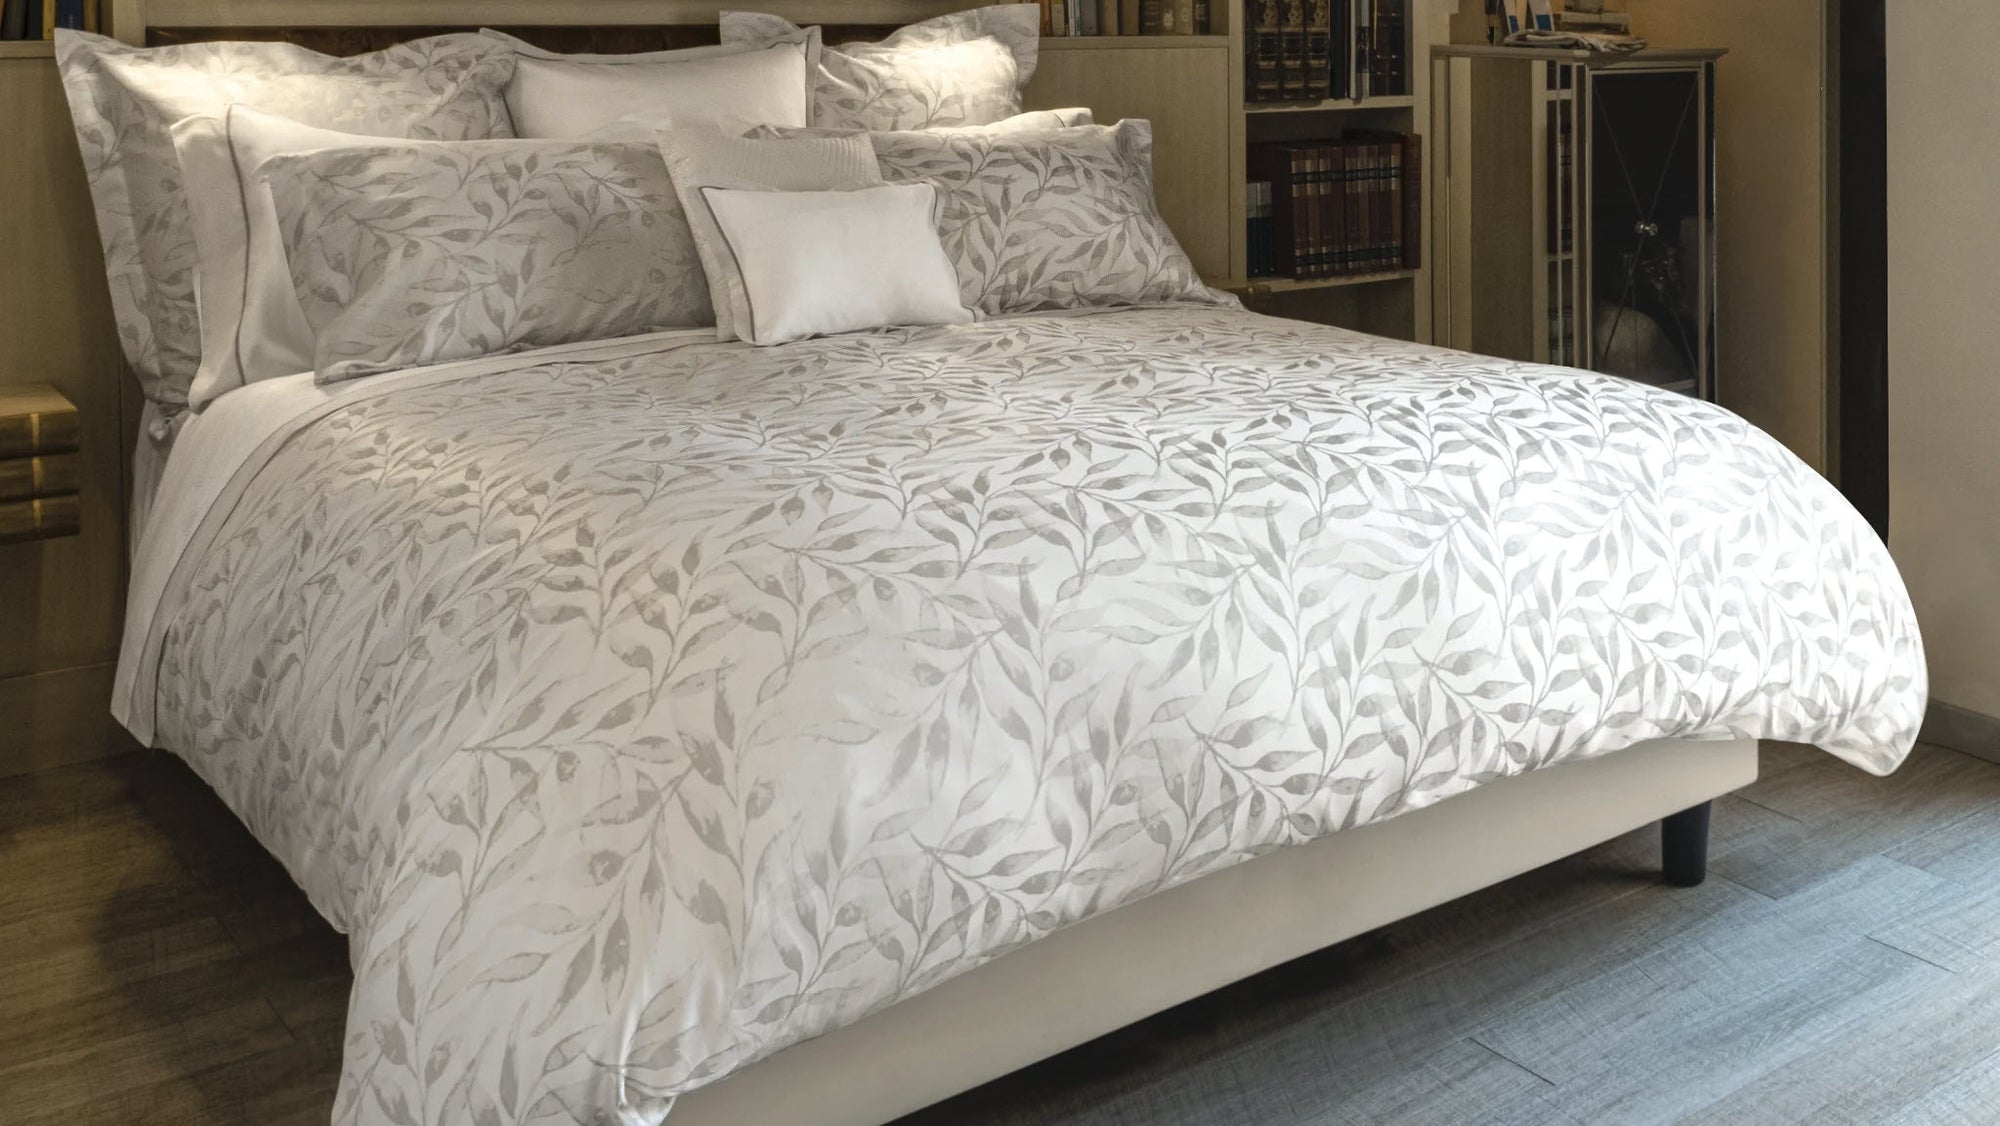 Signoria Firenze: Our Newest Bedding Collection Embraces Tuscan Elegance